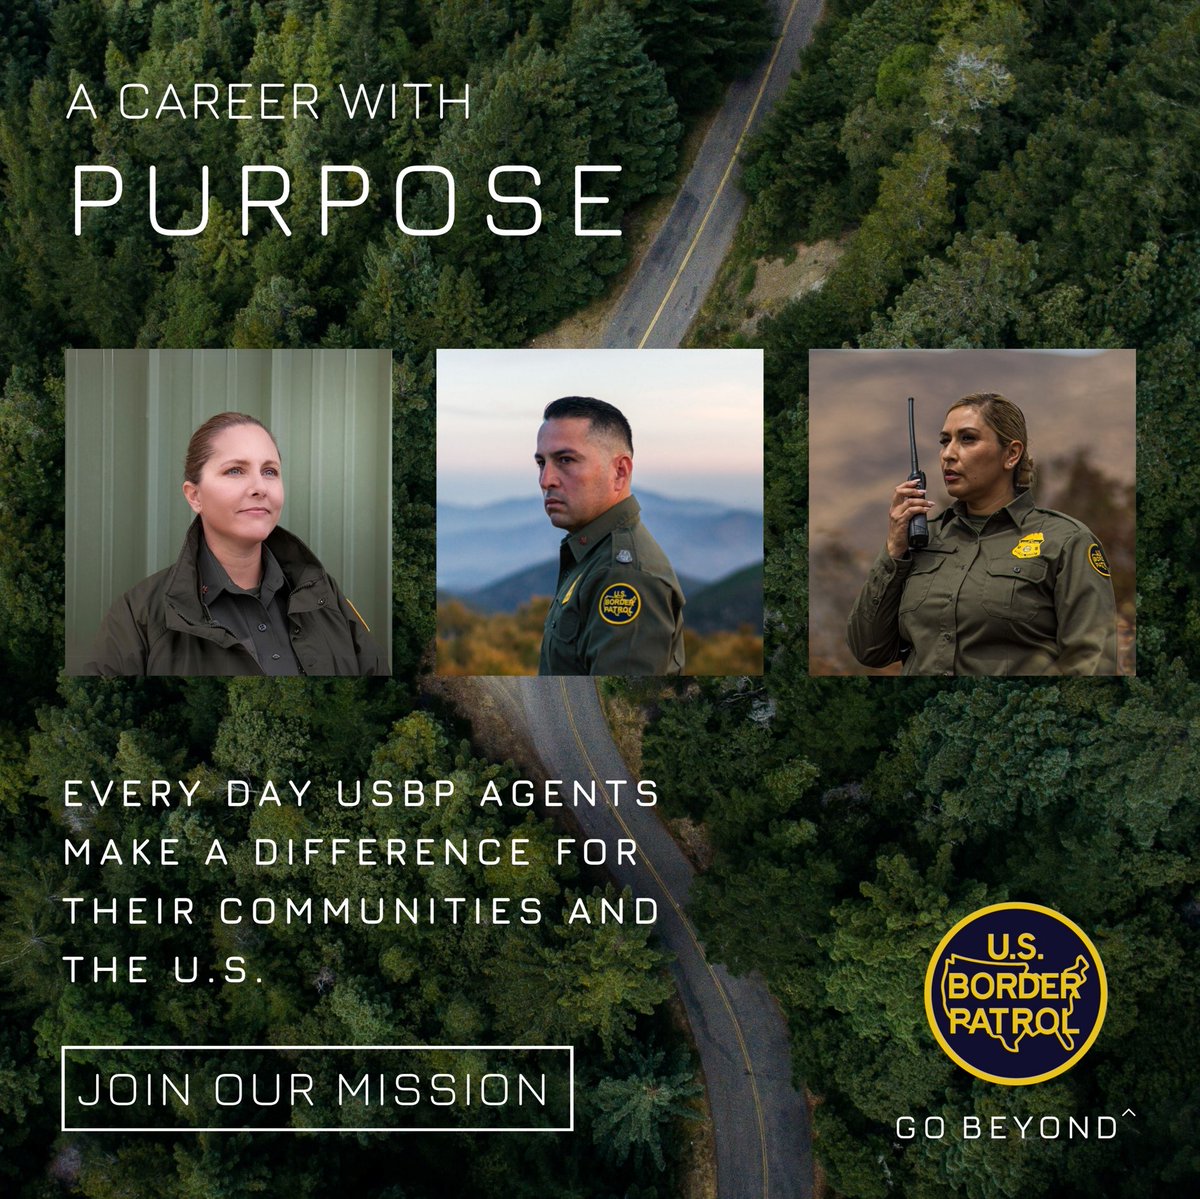 Are you ready for a career with purpose?​

We want focused candidates who hear the call to serve as Border Patrol Agents. Take the next step to keep our nation and communities safe.​

Join our Talent Network: go.dhs.gov/oW5​

#CBPCareers #NowHiring